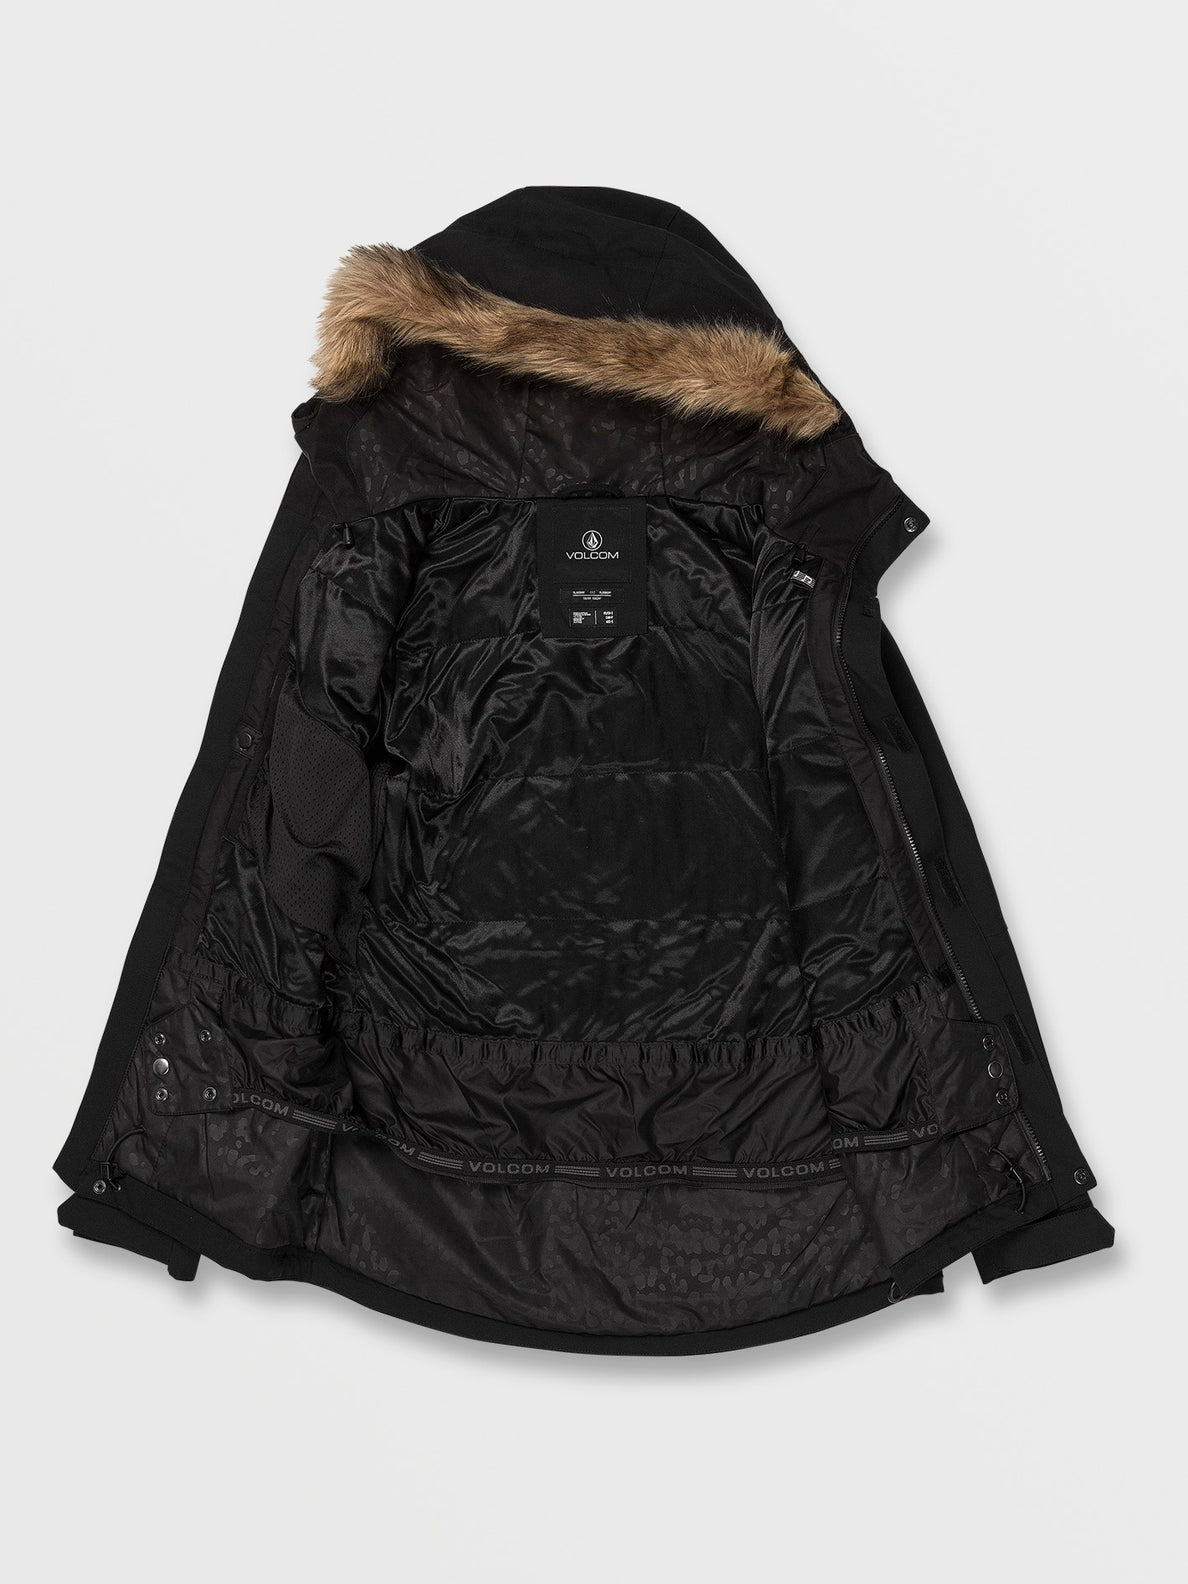 Shadow Insulated Jacket - BLACK (H0452408_BLK) [21]